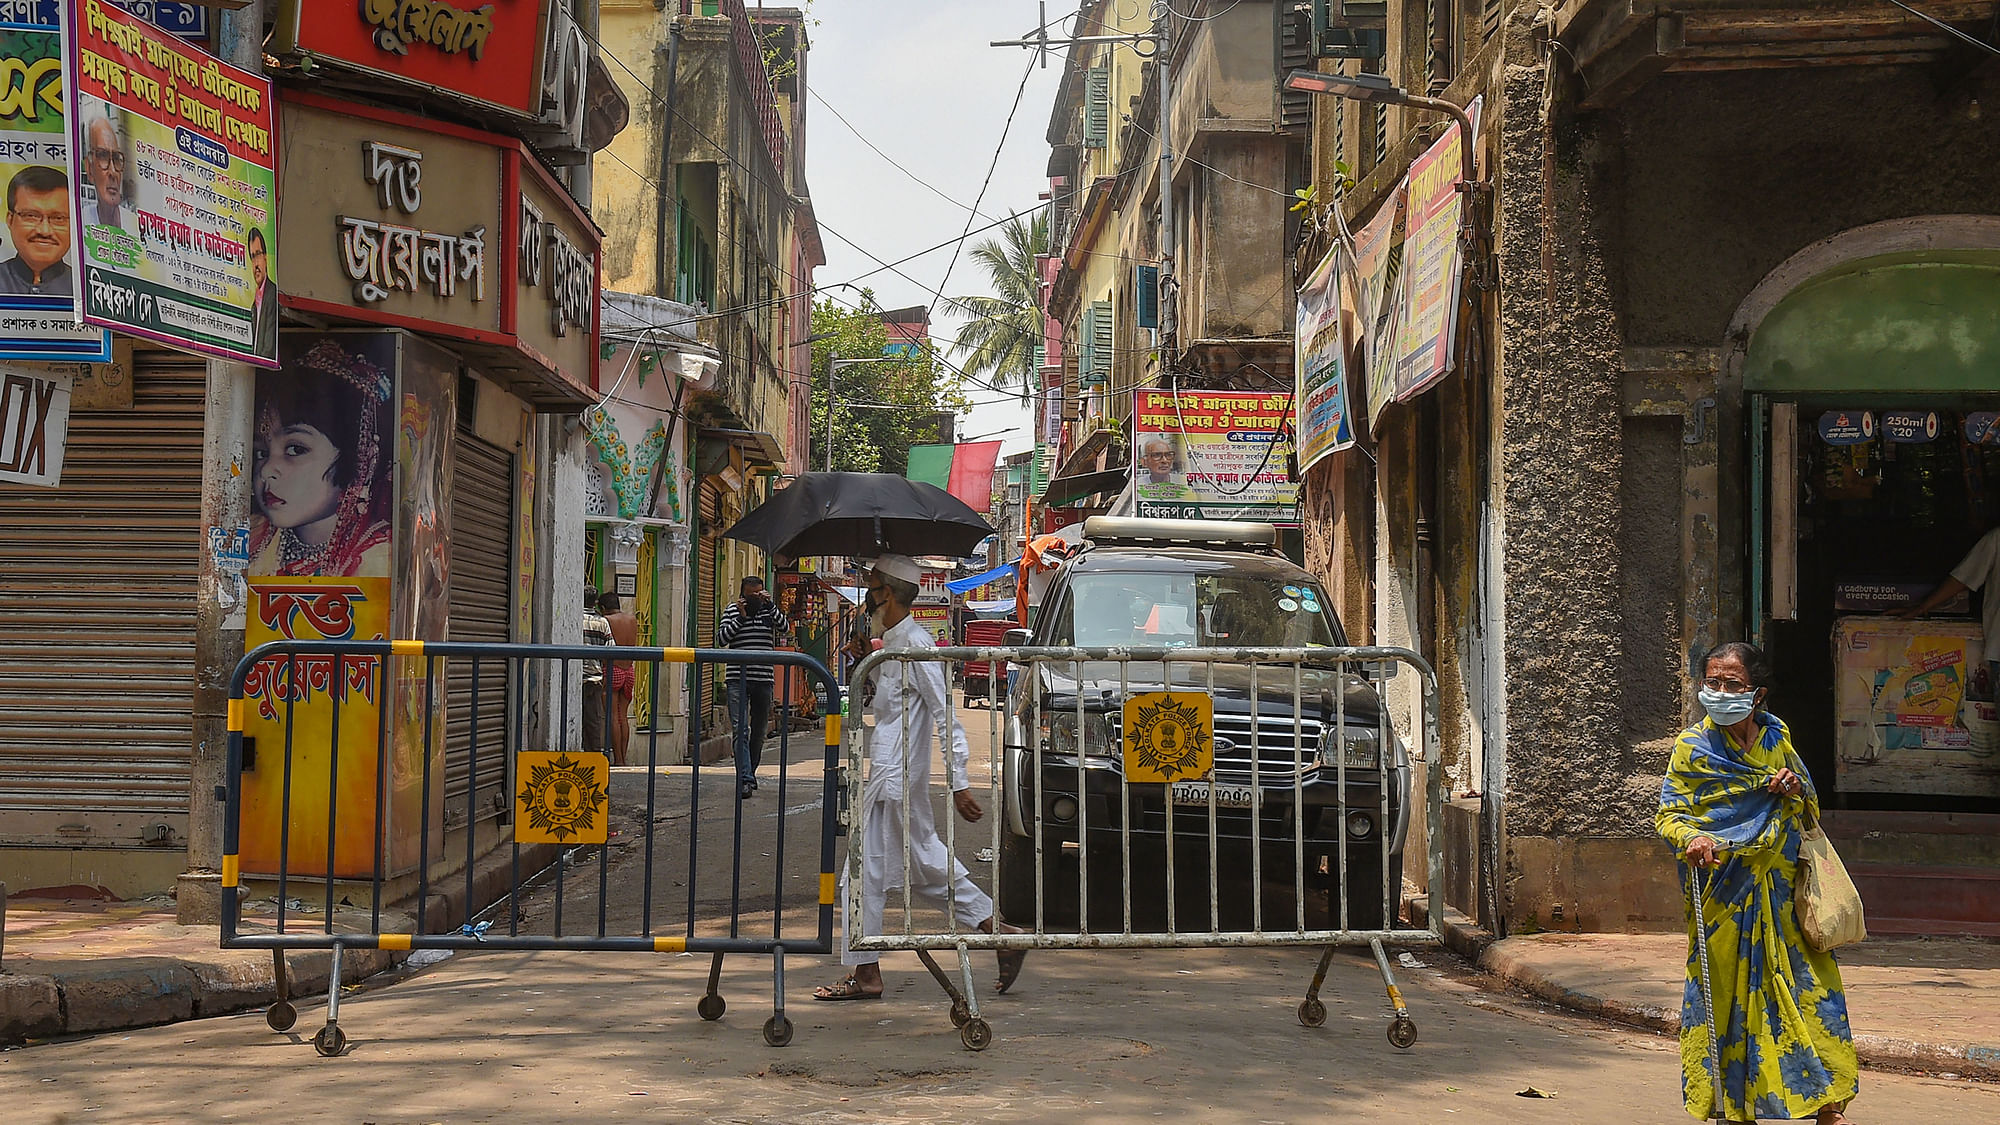 Barricades are seen outside a lane to restrict entry and exit during the nationwide lockdown, imposed in the wake of the novel coronavirus pandemic, in Kolkata.